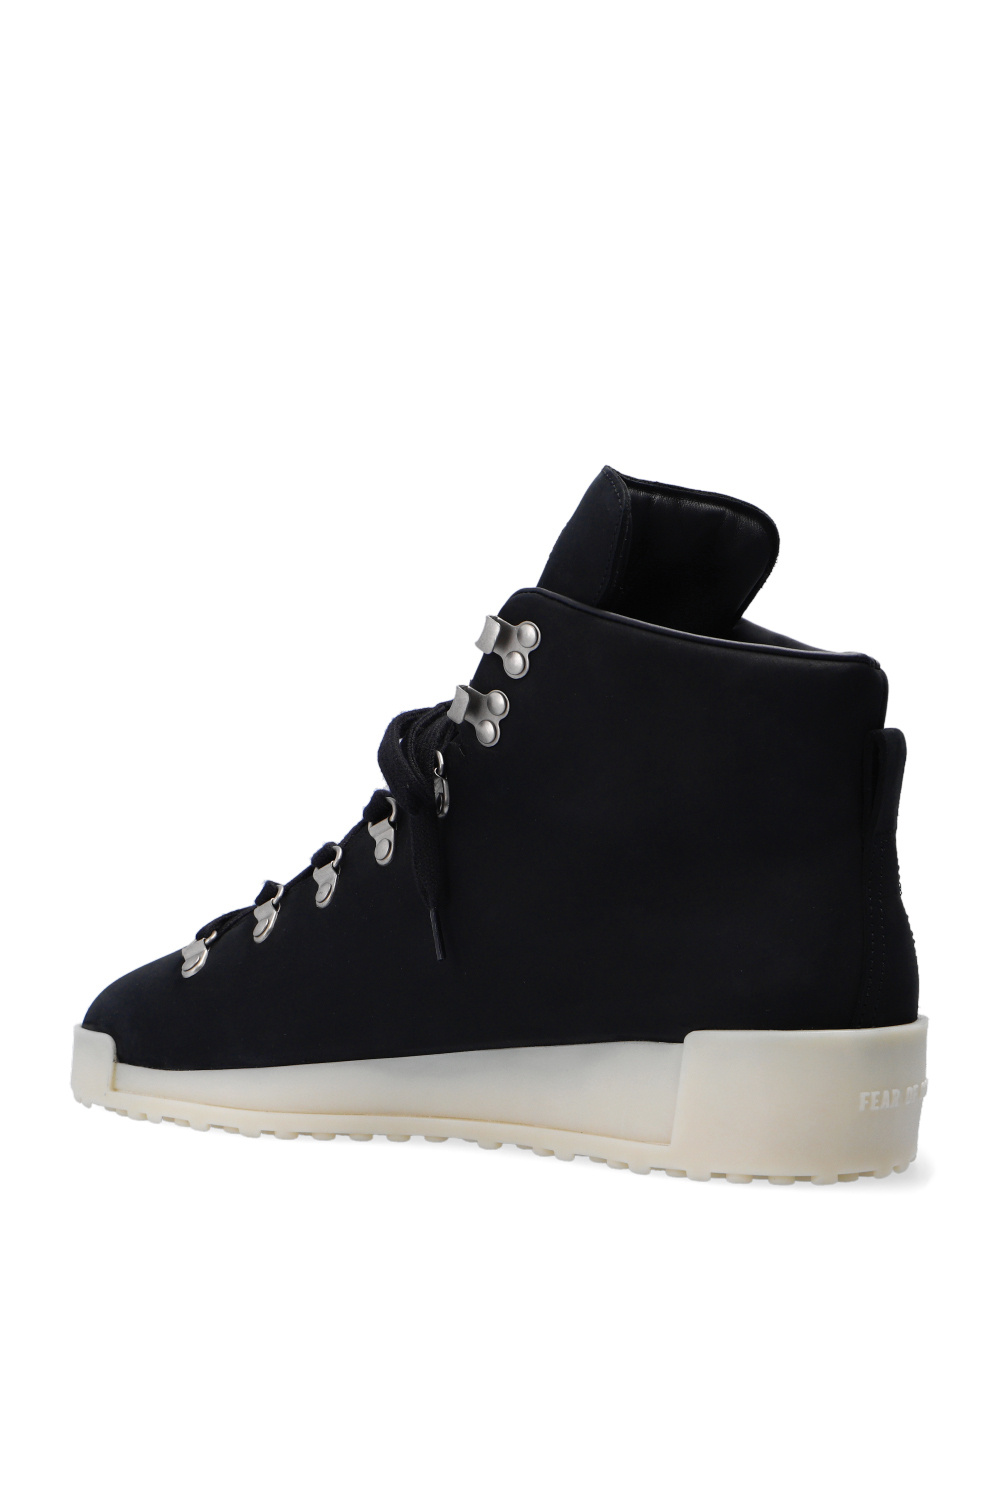 Sneakers ON Cloud Hi 2899174 Forest 346 ‘7th Hiker’ boots